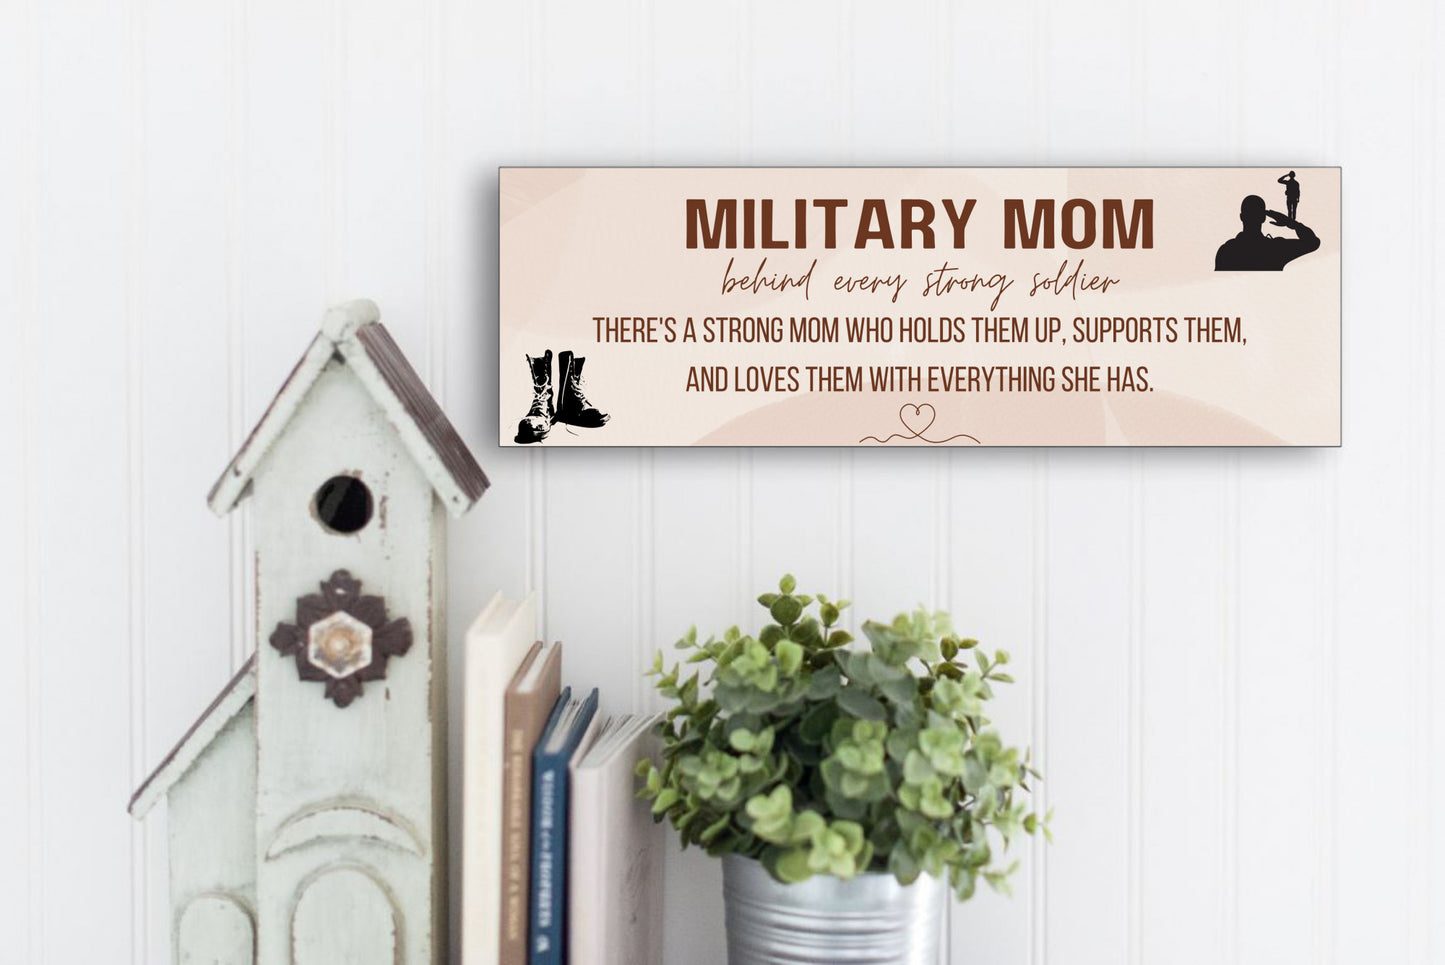 Military Mom Behind Every Strong Soldier - Wall or Table Display Sign